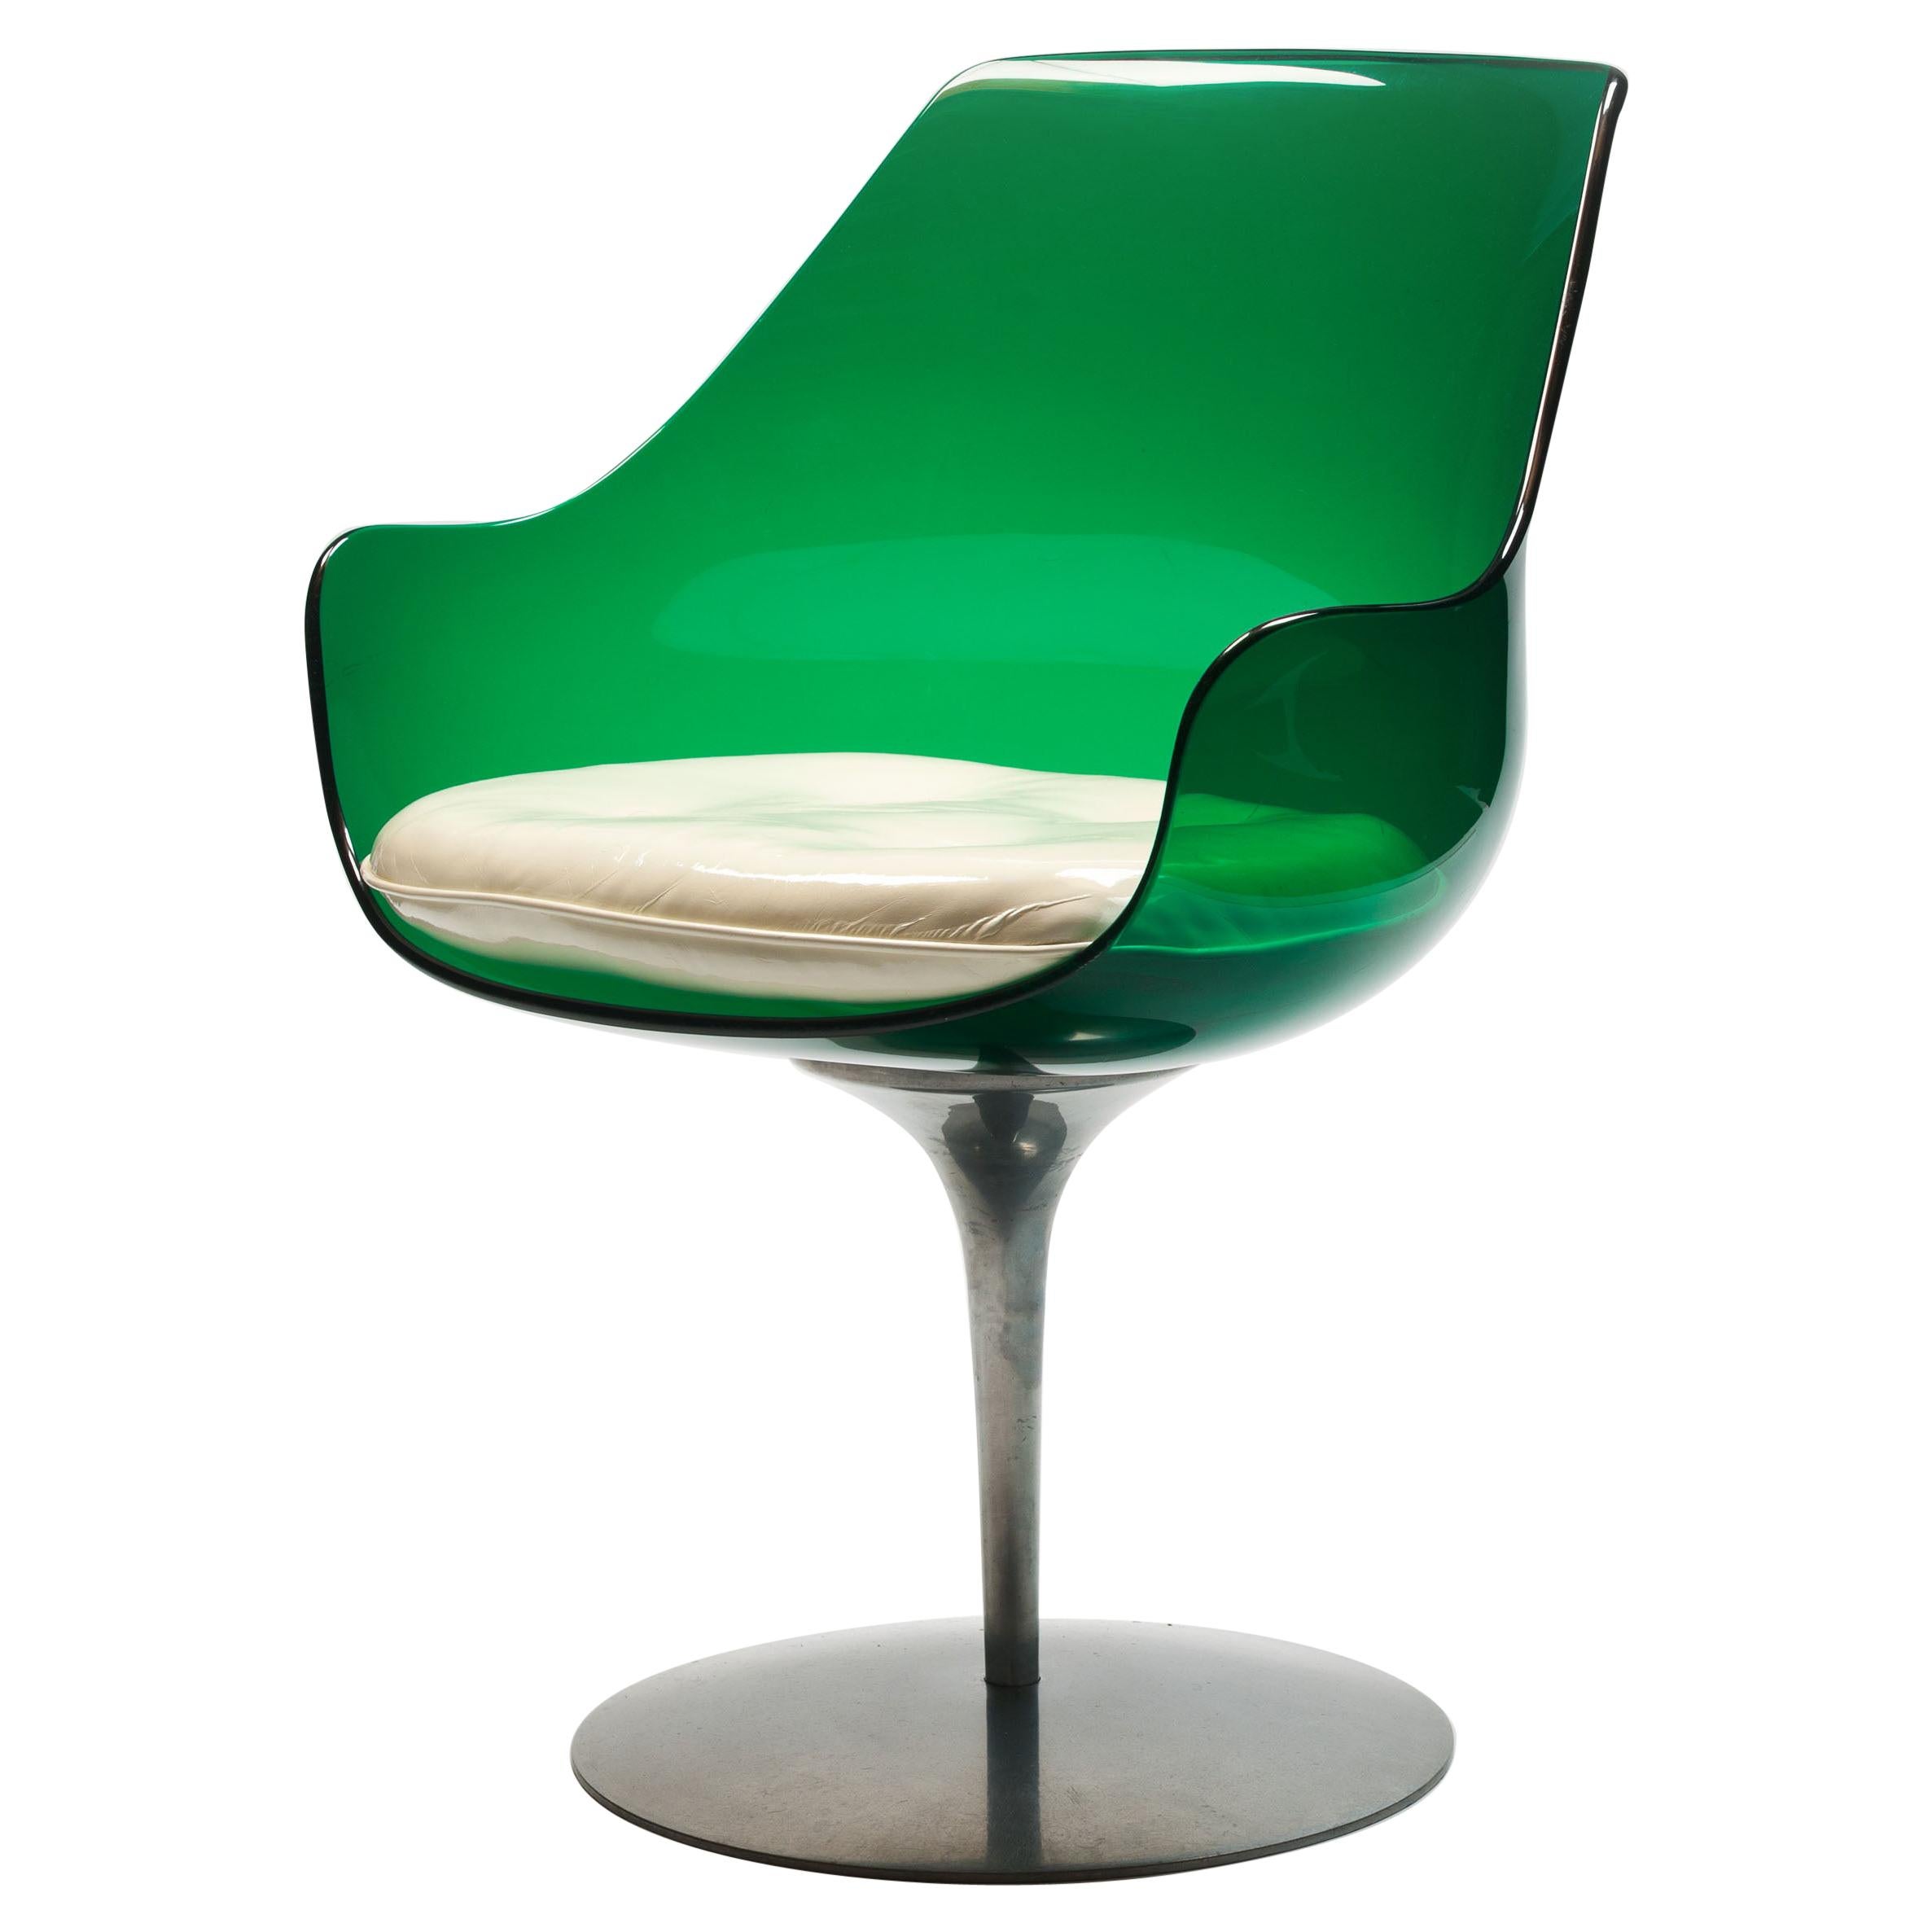 Rare Green Edition 'Champagne' Chair by Estelle & Erwin Laverne